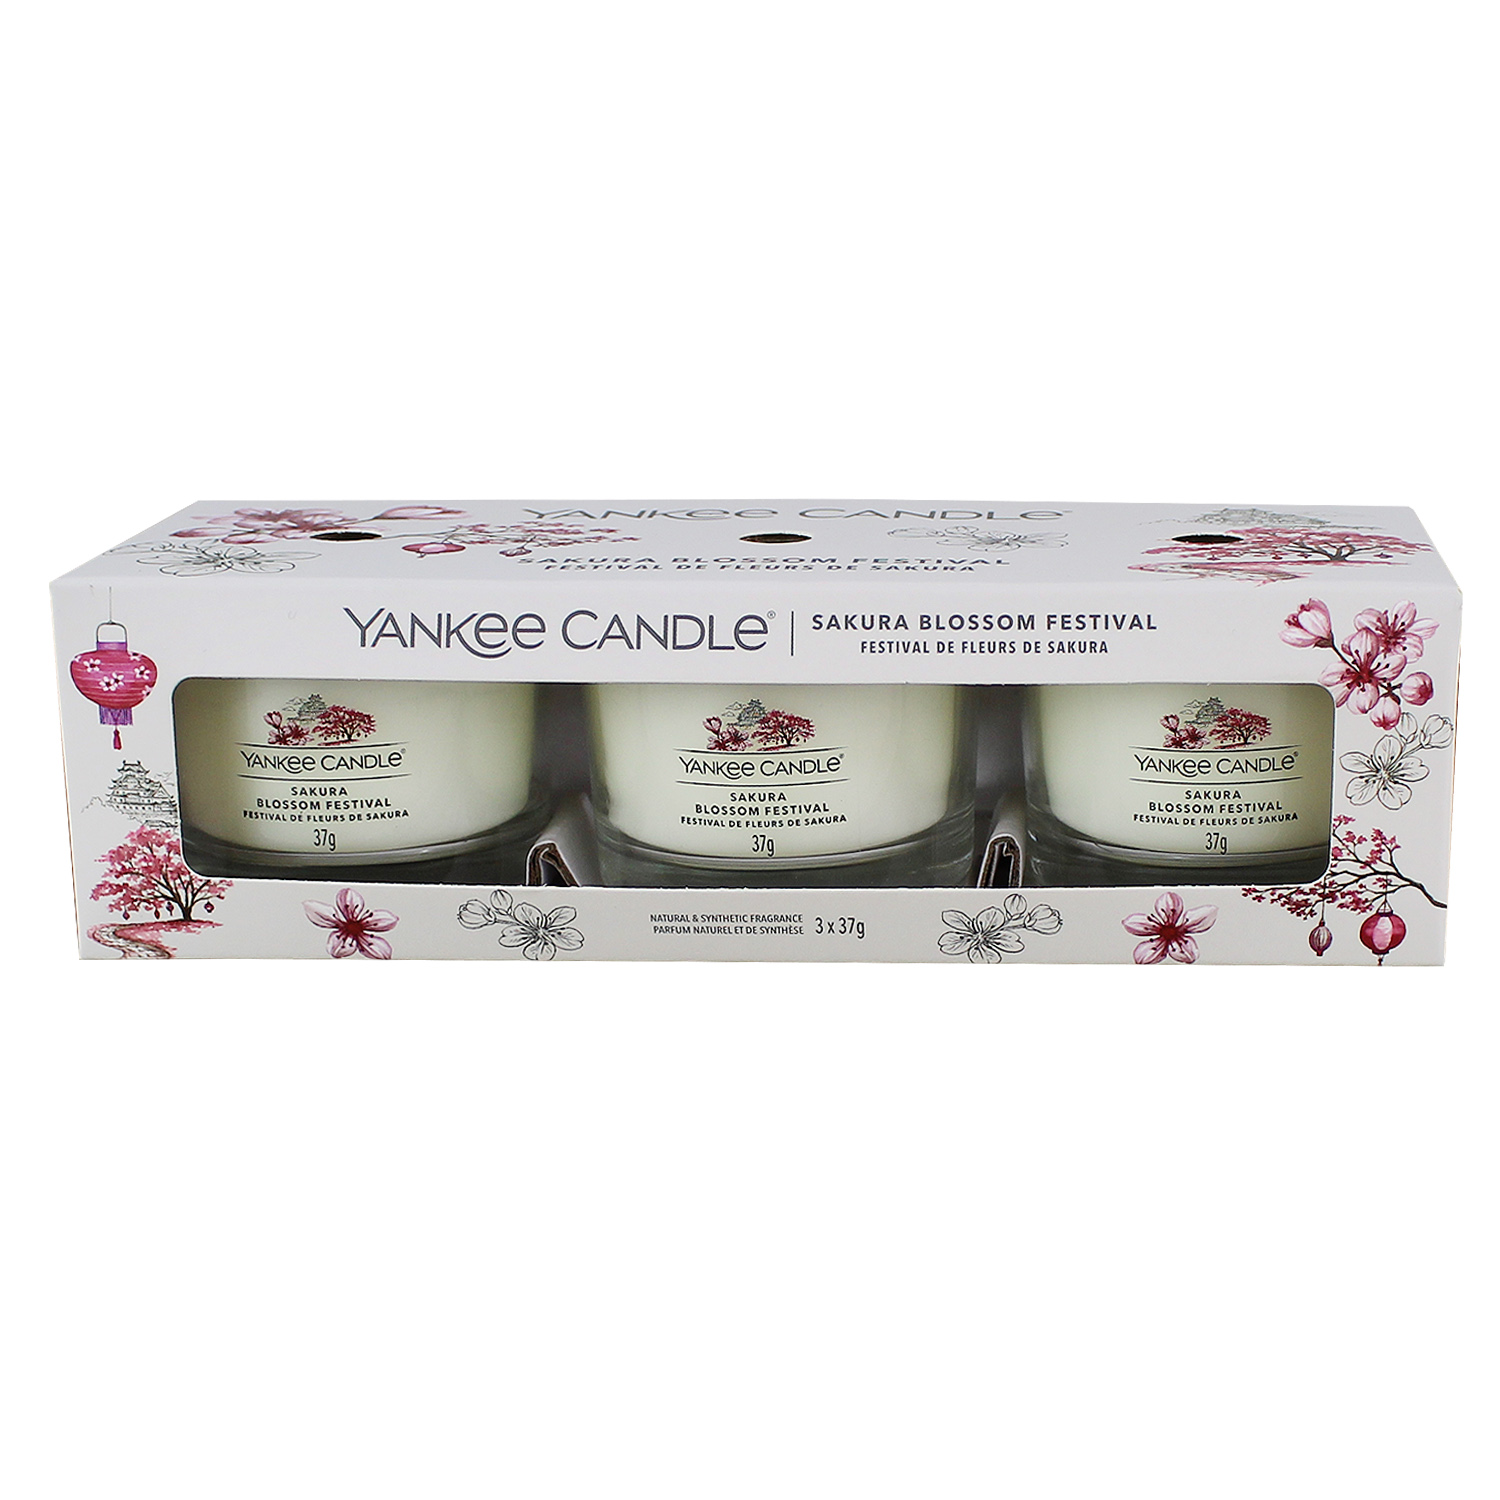 Yankee Candle Sakura Blossom Festival 3 Filled Votive Candle Gift Set -  WeeklyDeals4Less